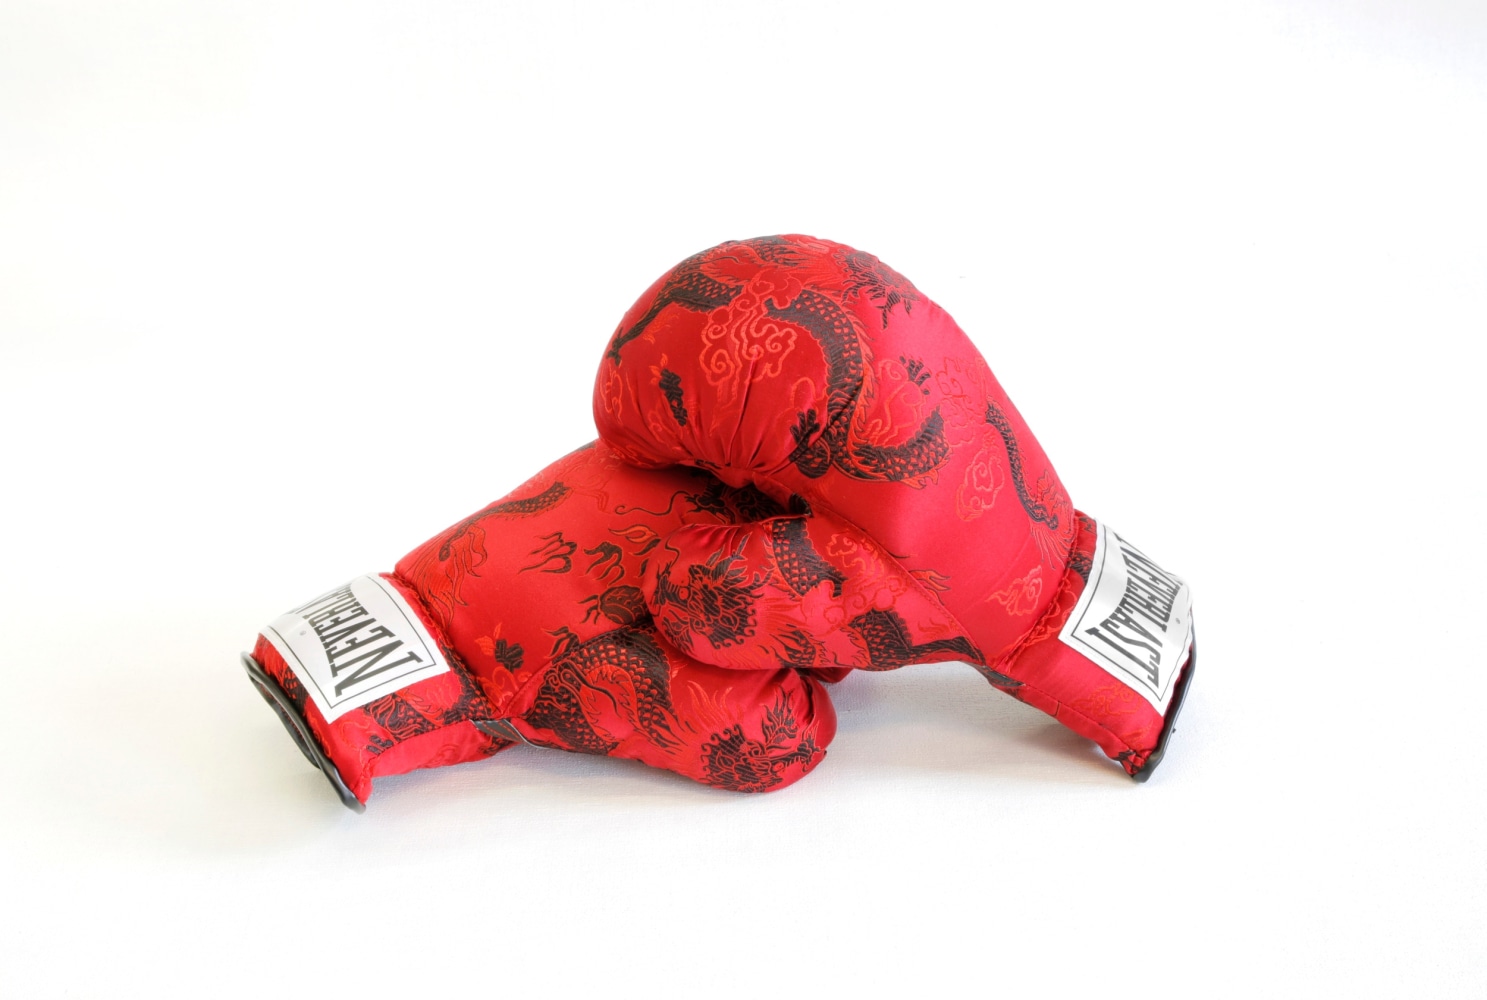 Satch Hoyt
Neverlast, 2008
Silk boxing gloves
Edition of 7Courtesy of the Artist